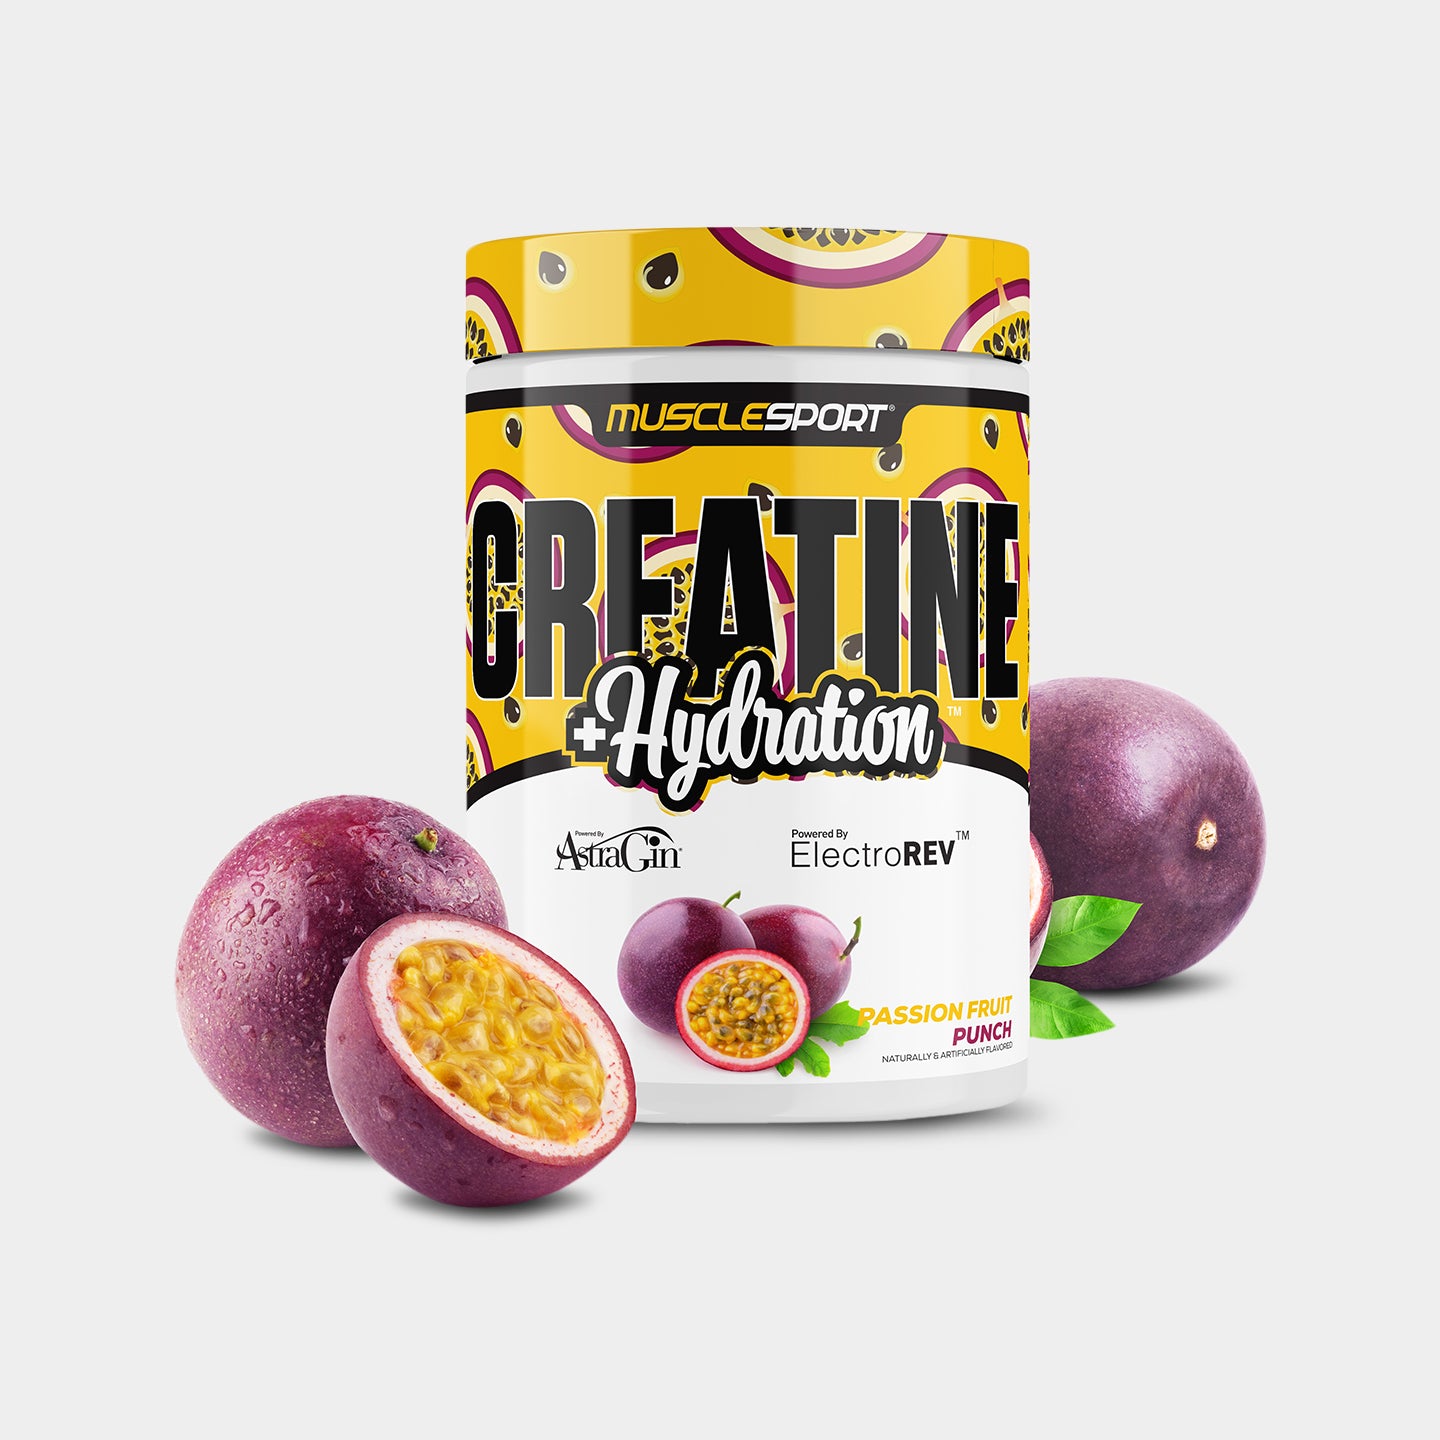 Musclesport Creatine + Hydration, Passion Fruit, 30 Servings A1